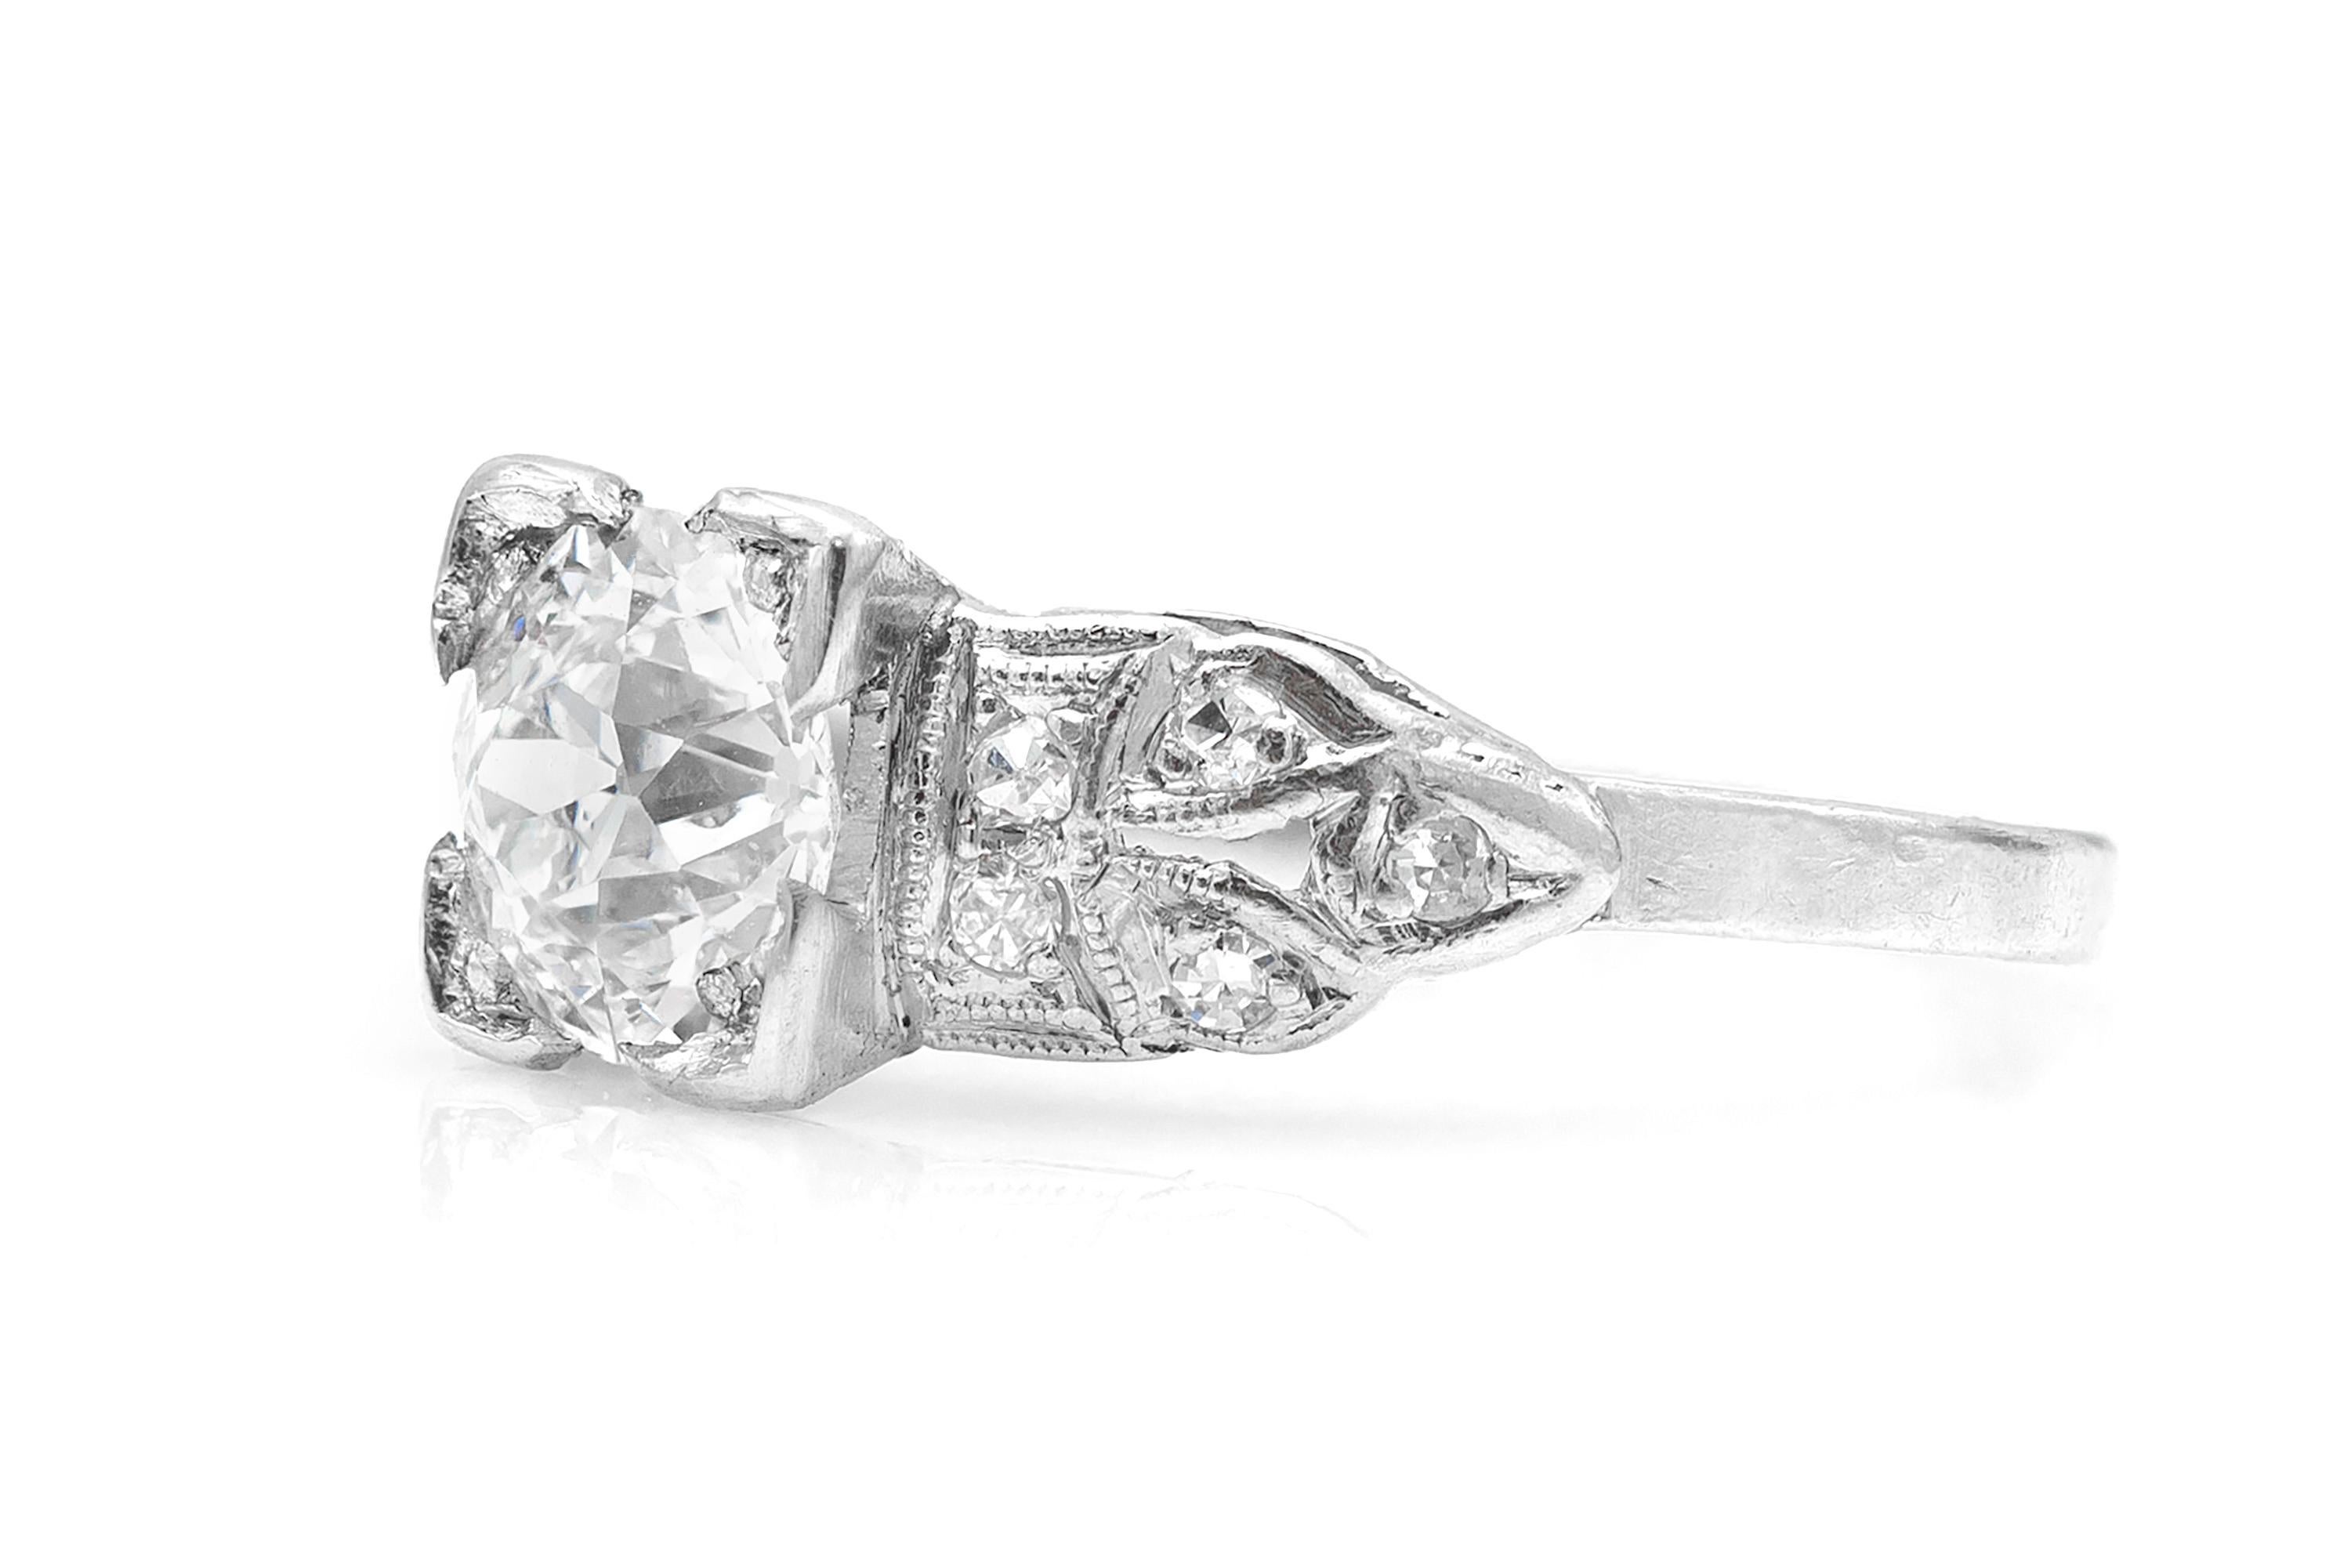 Finely crafted in platinum featuring a center diamond weighing 0.87 carat and surrounding round cut diamonds in an Art Deco setting.
Size 3 3/4 (resizable).